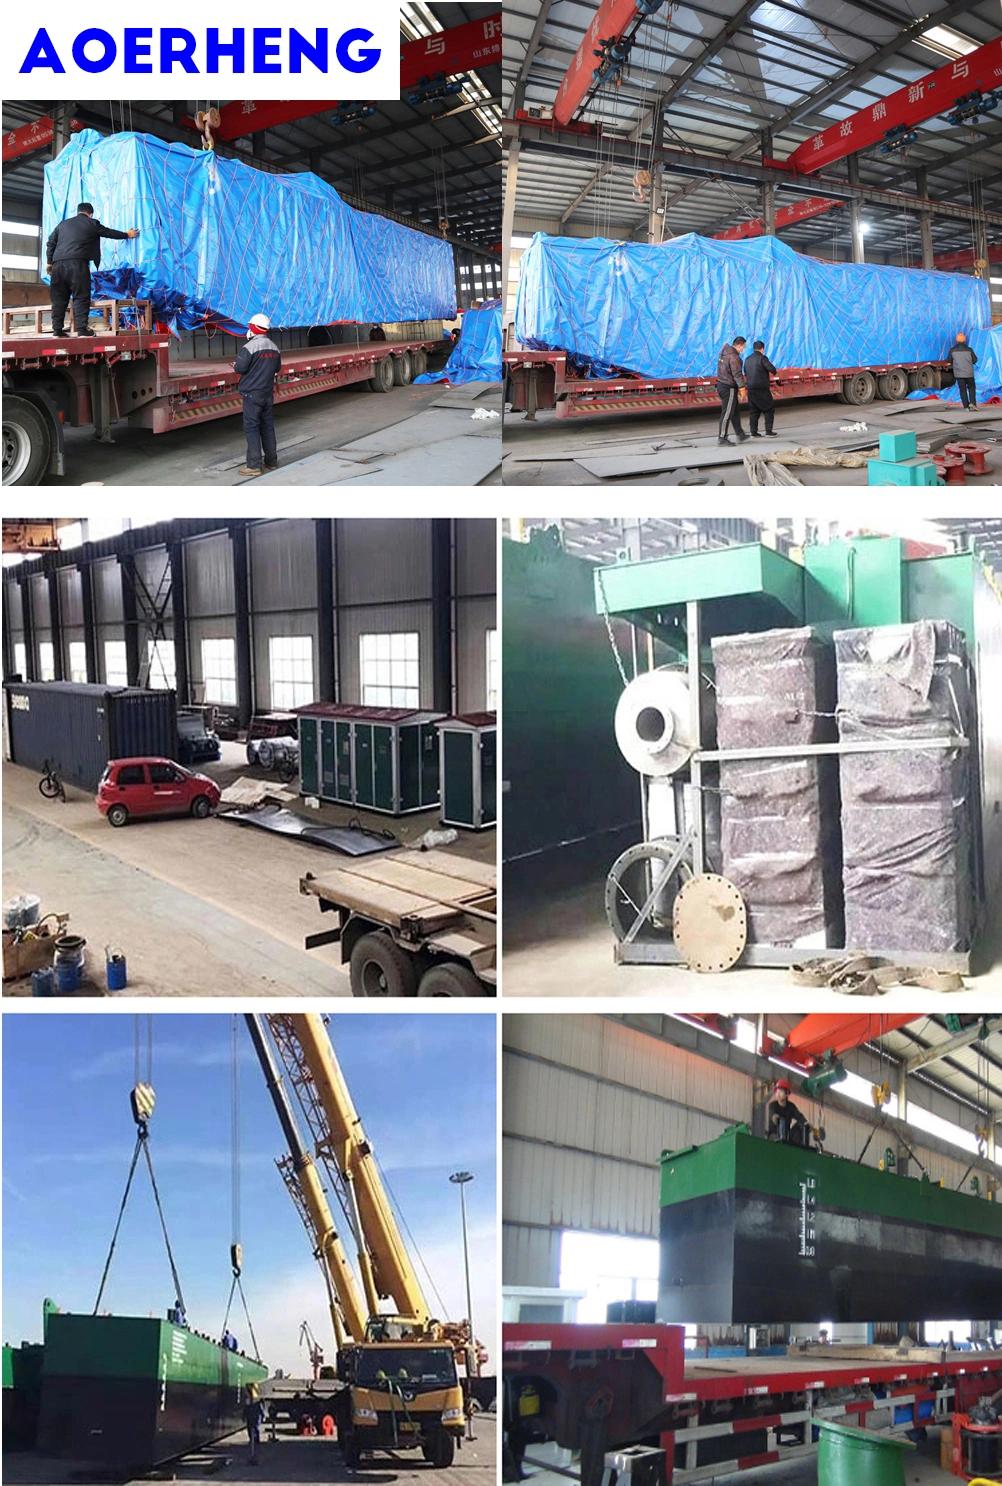 High Efficiency Diesel Engine Cutter Suction Dredging Equipment for Sale